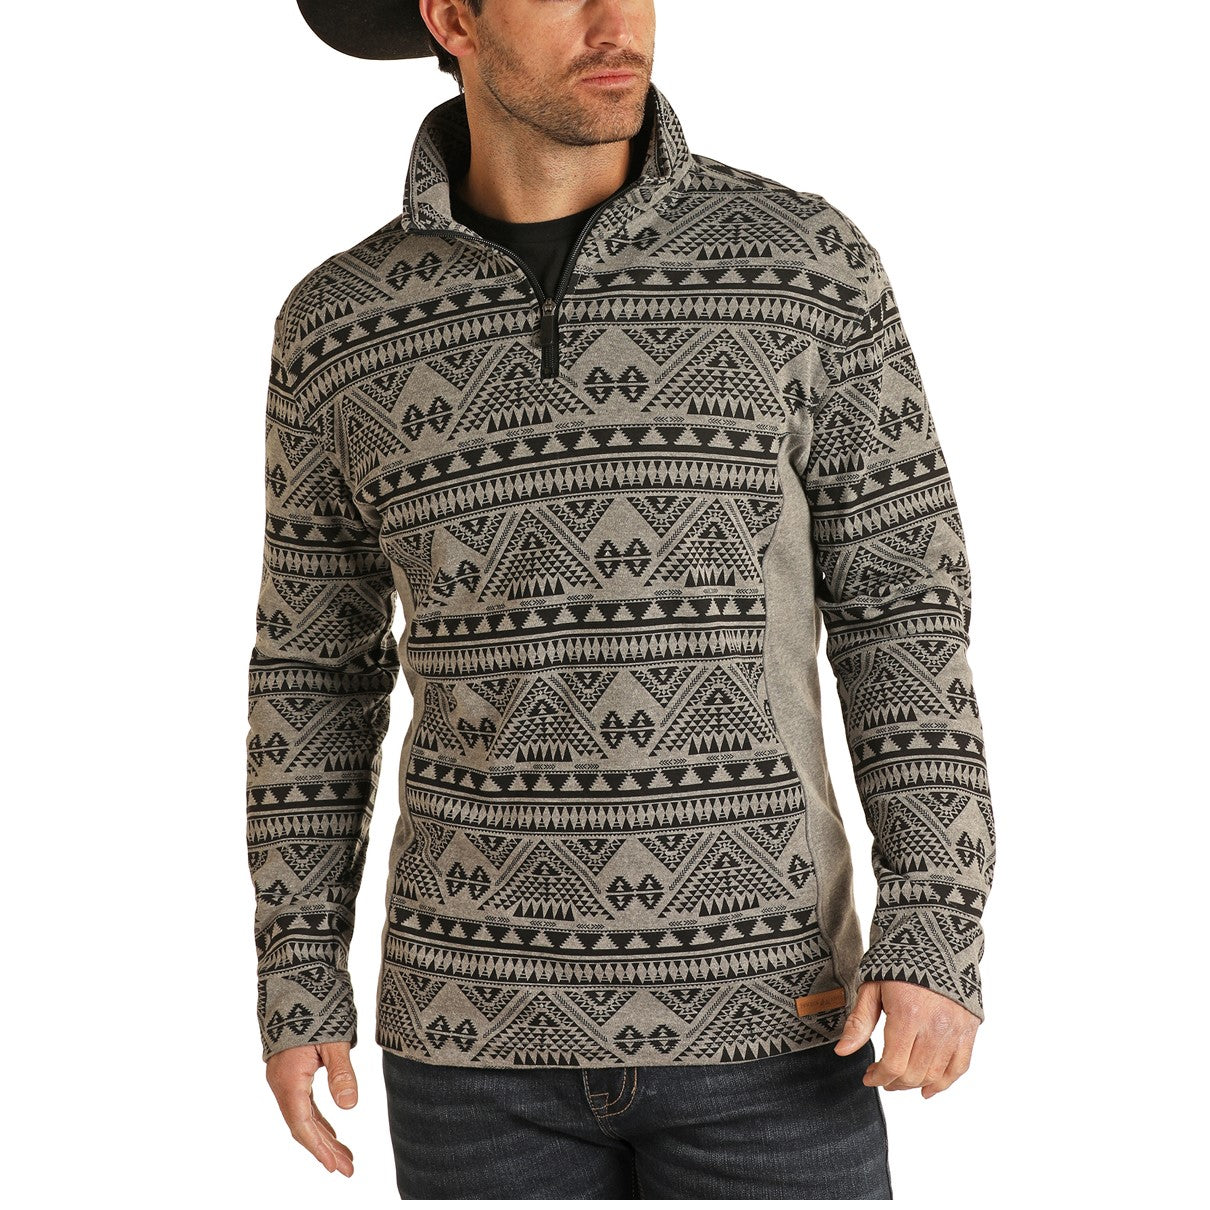 Powder River Outfitters Men's Heather Aztec Zipper Pullover 91-1035-01